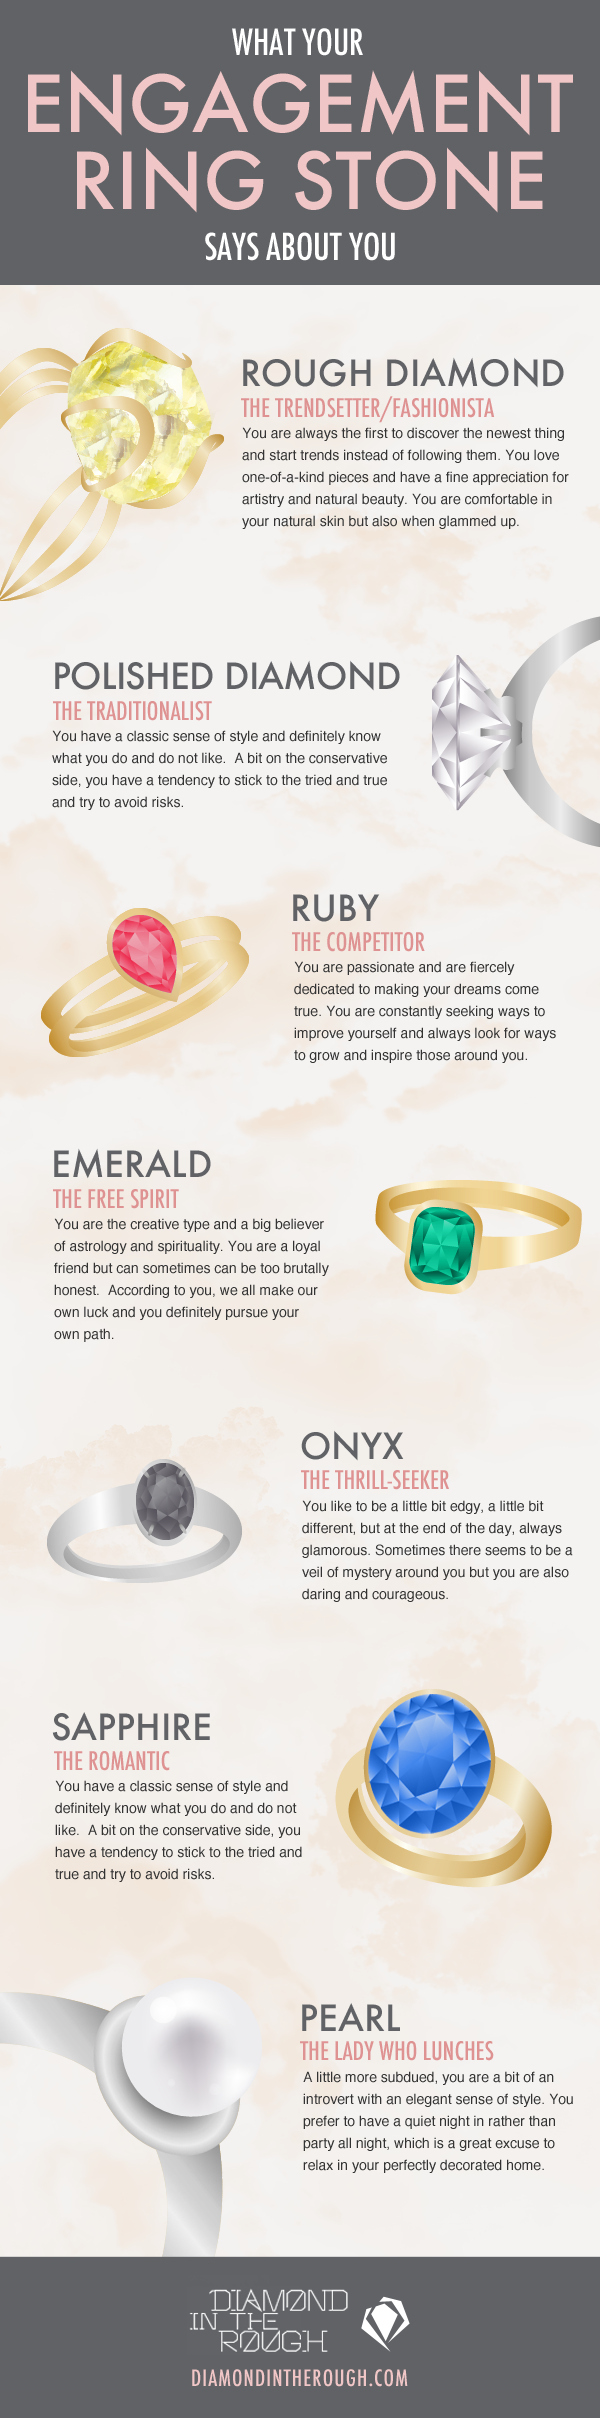 What Does Your Engagement Ring Stone Say About You?